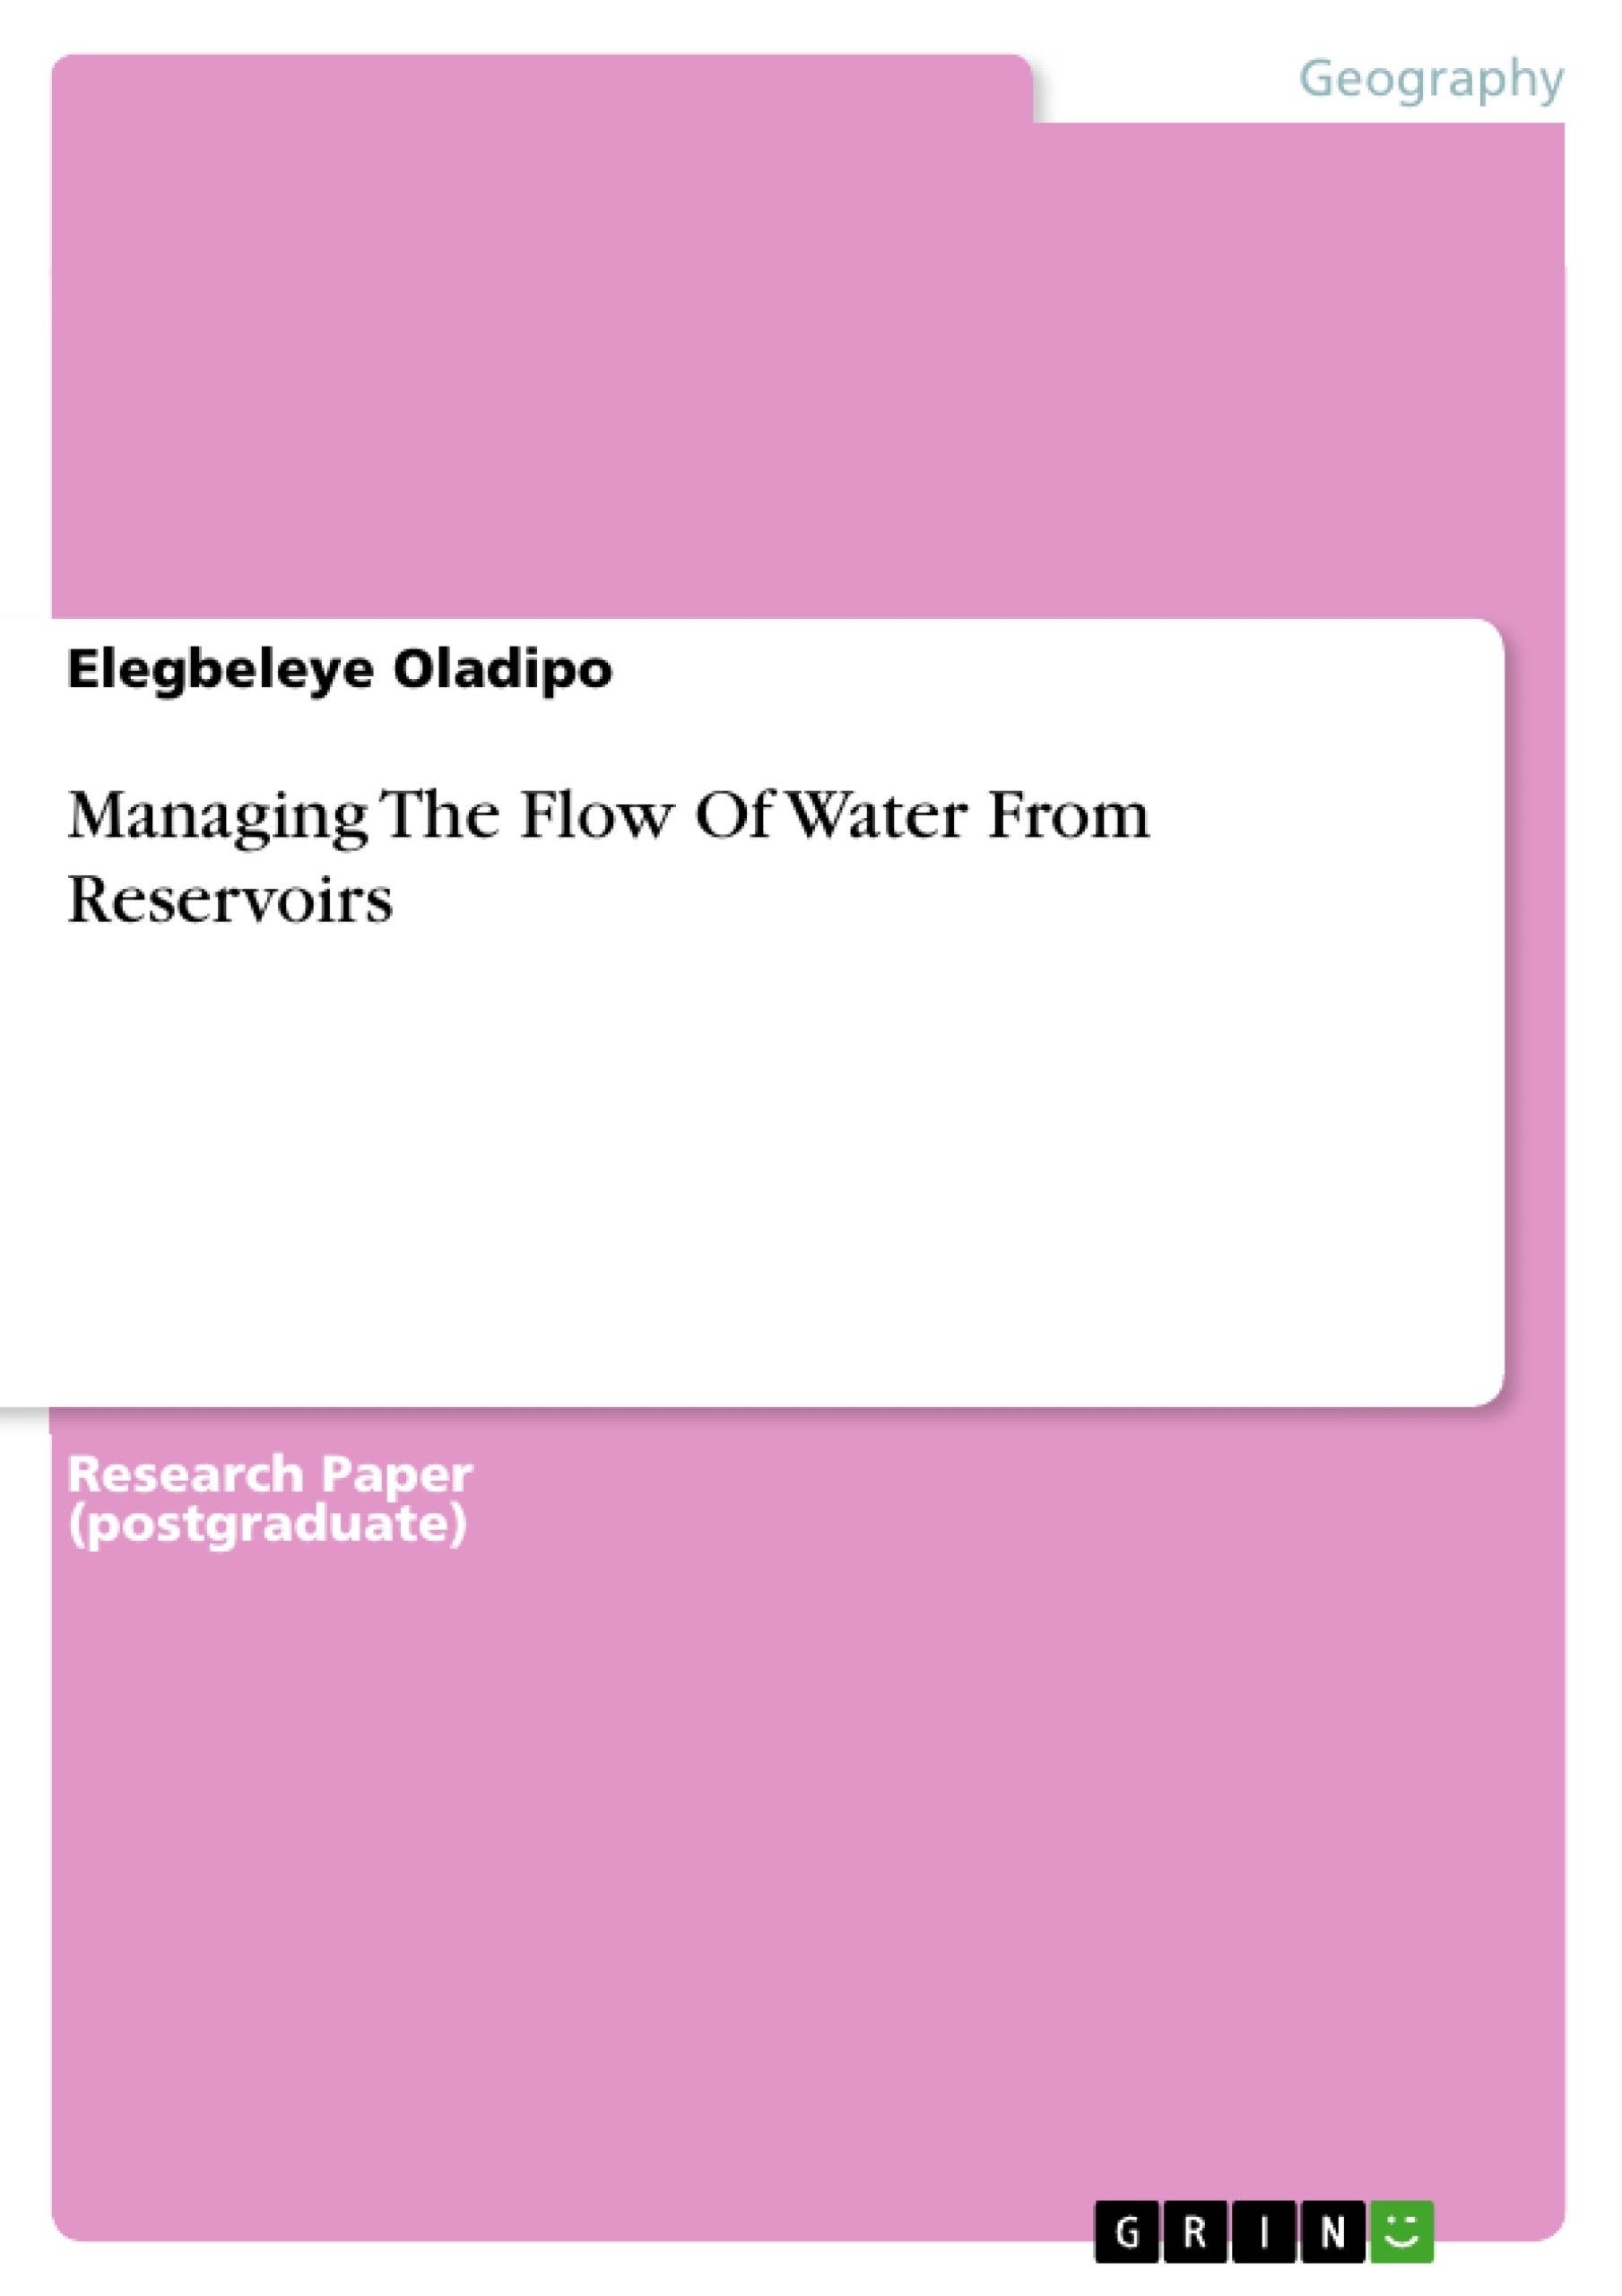 Título: Managing The Flow Of Water From Reservoirs